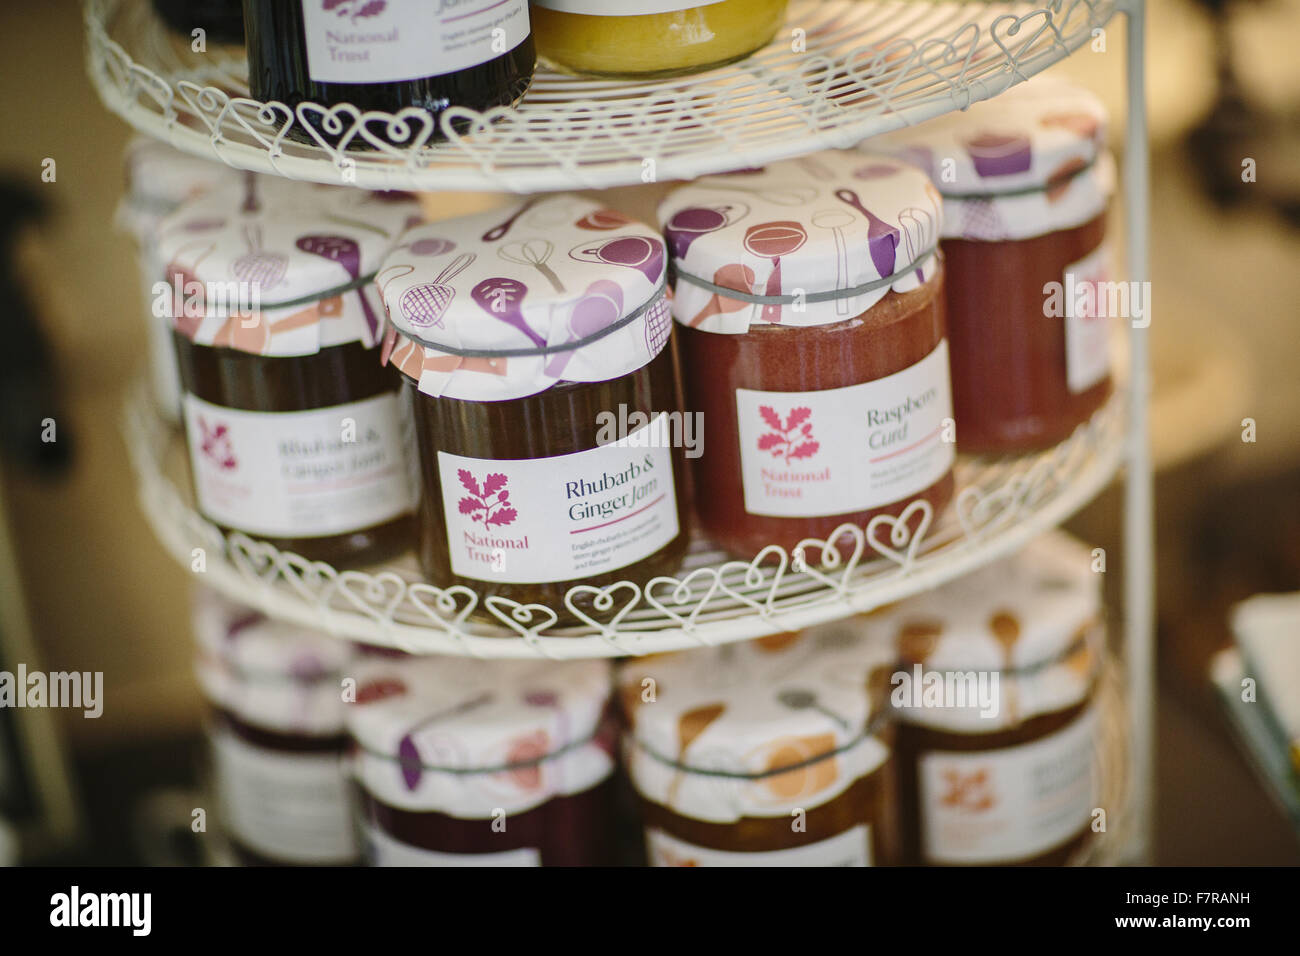 Jam for sale at Allan Bank and Grasmere, Cumbria. Allan Bank is partially restored and undecorated. Stock Photo